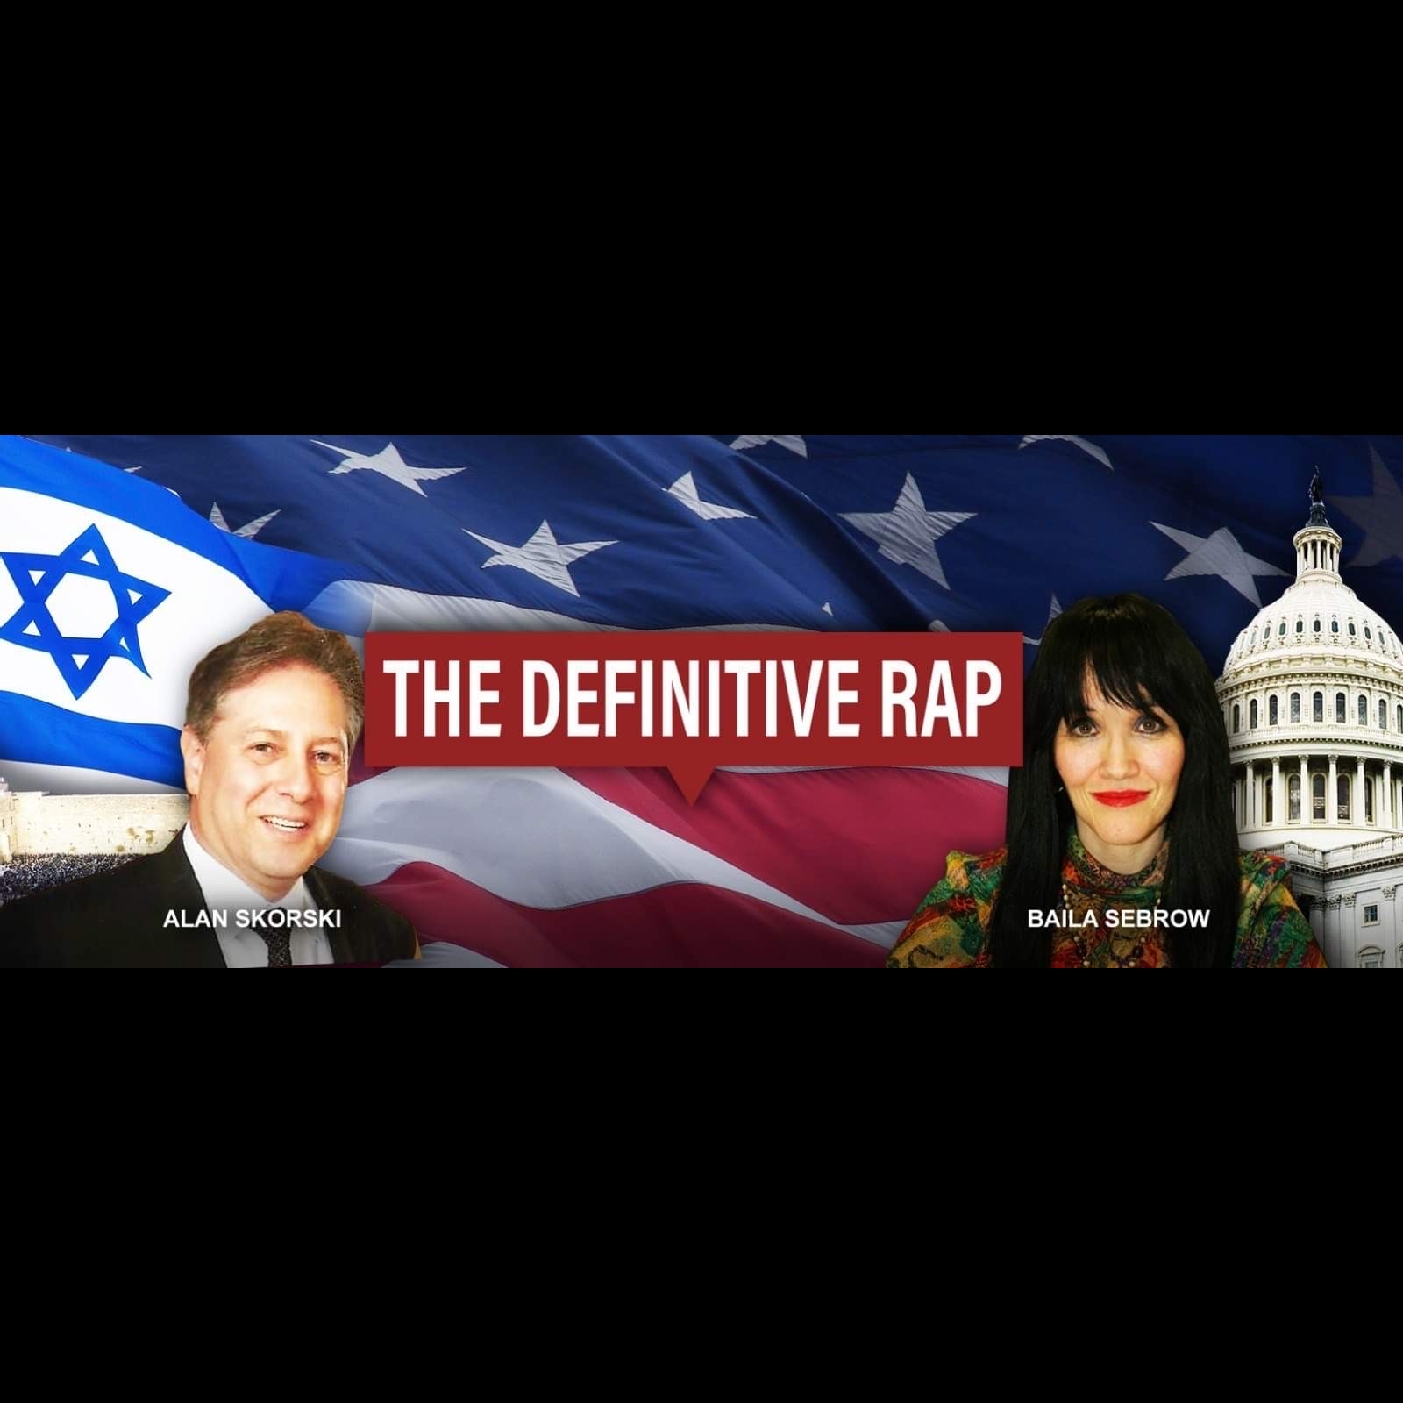 THE DEFINITIVE RAP: Interview with JNS Editor in Chief Jonathan Tobin,  the long anti-Israel record of US Senate candidate from GA., Raphael Warnock.